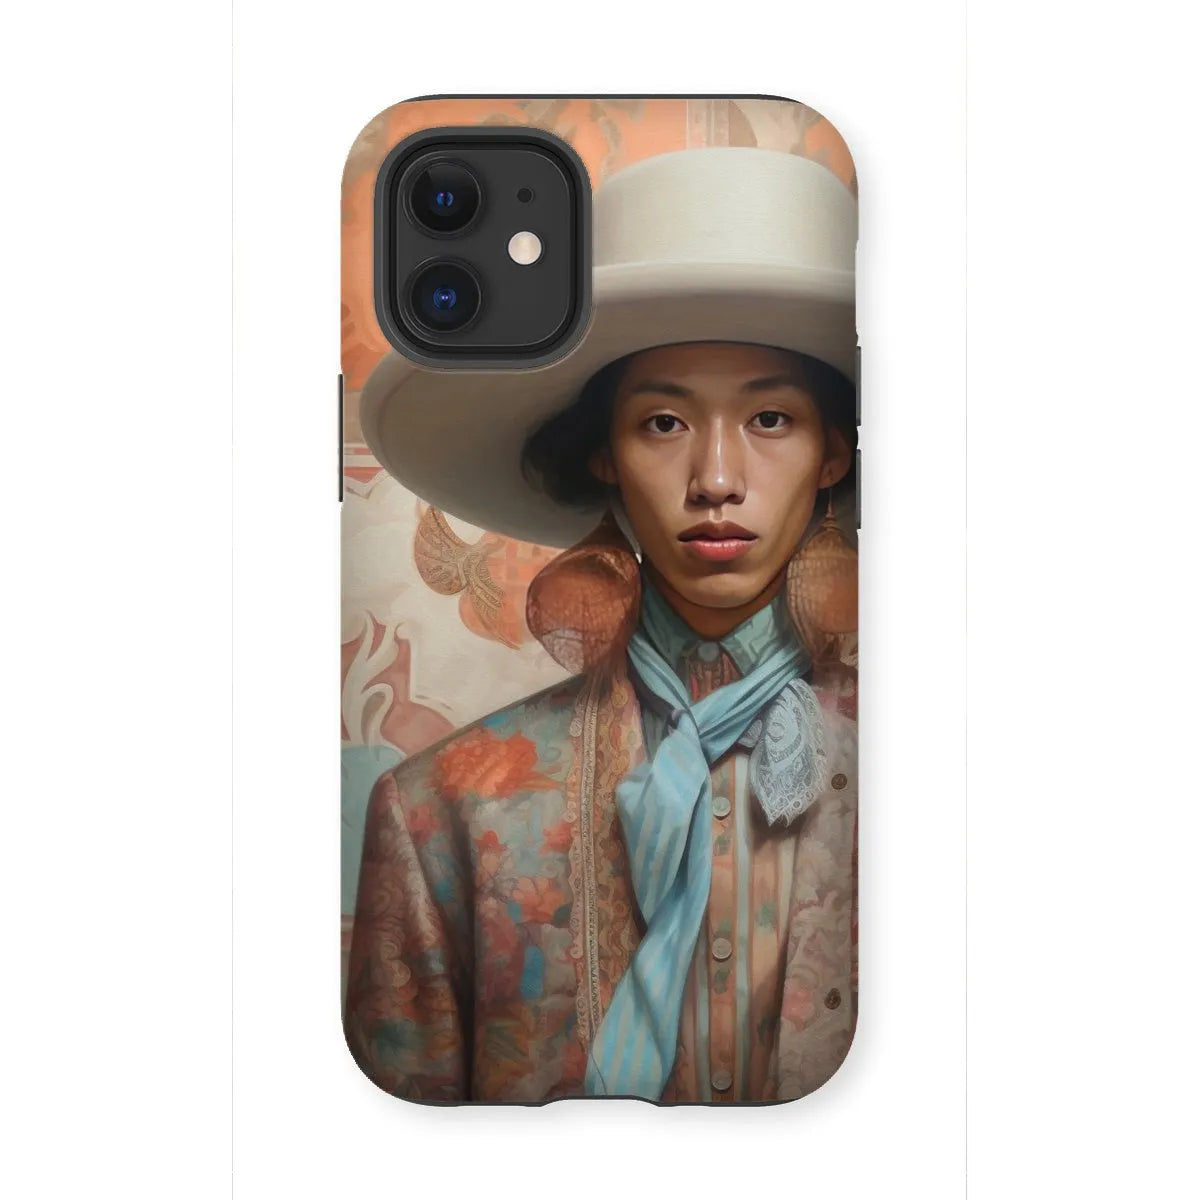 Iyaan The Gay Cowboy - Dandy Gay Aesthetic Art Phone Case - Iphone 12 Mini / Matte - Mobile Phone Cases - Aesthetic Art